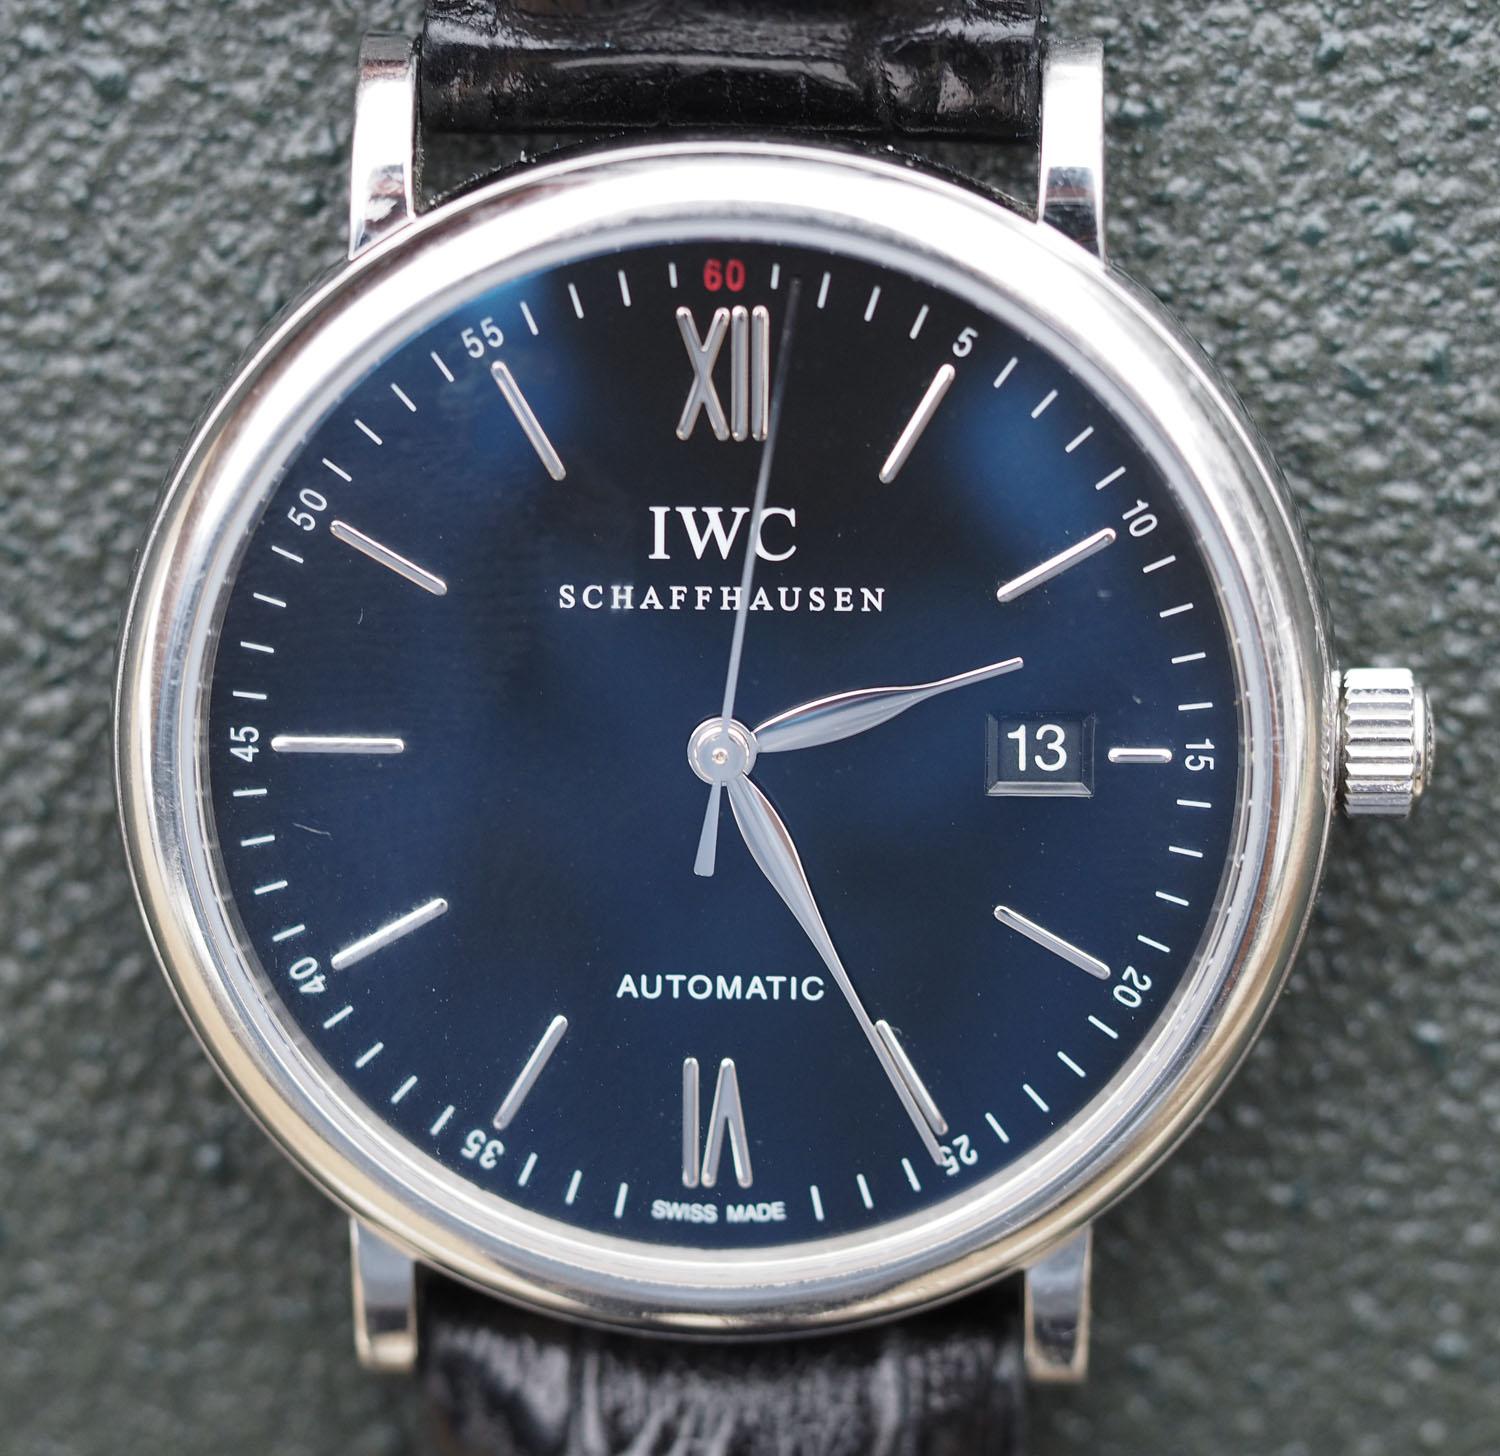 One Pre-Owned IWC Gents Stainless Steel Portofino Automatic (Self-Winding) Wristwatch on a Black Strap.  The watch measures 40mm in diameter. 

Please see some additional features:
Height 9.2 mm
Water resistance 3 bar
42 hours Power